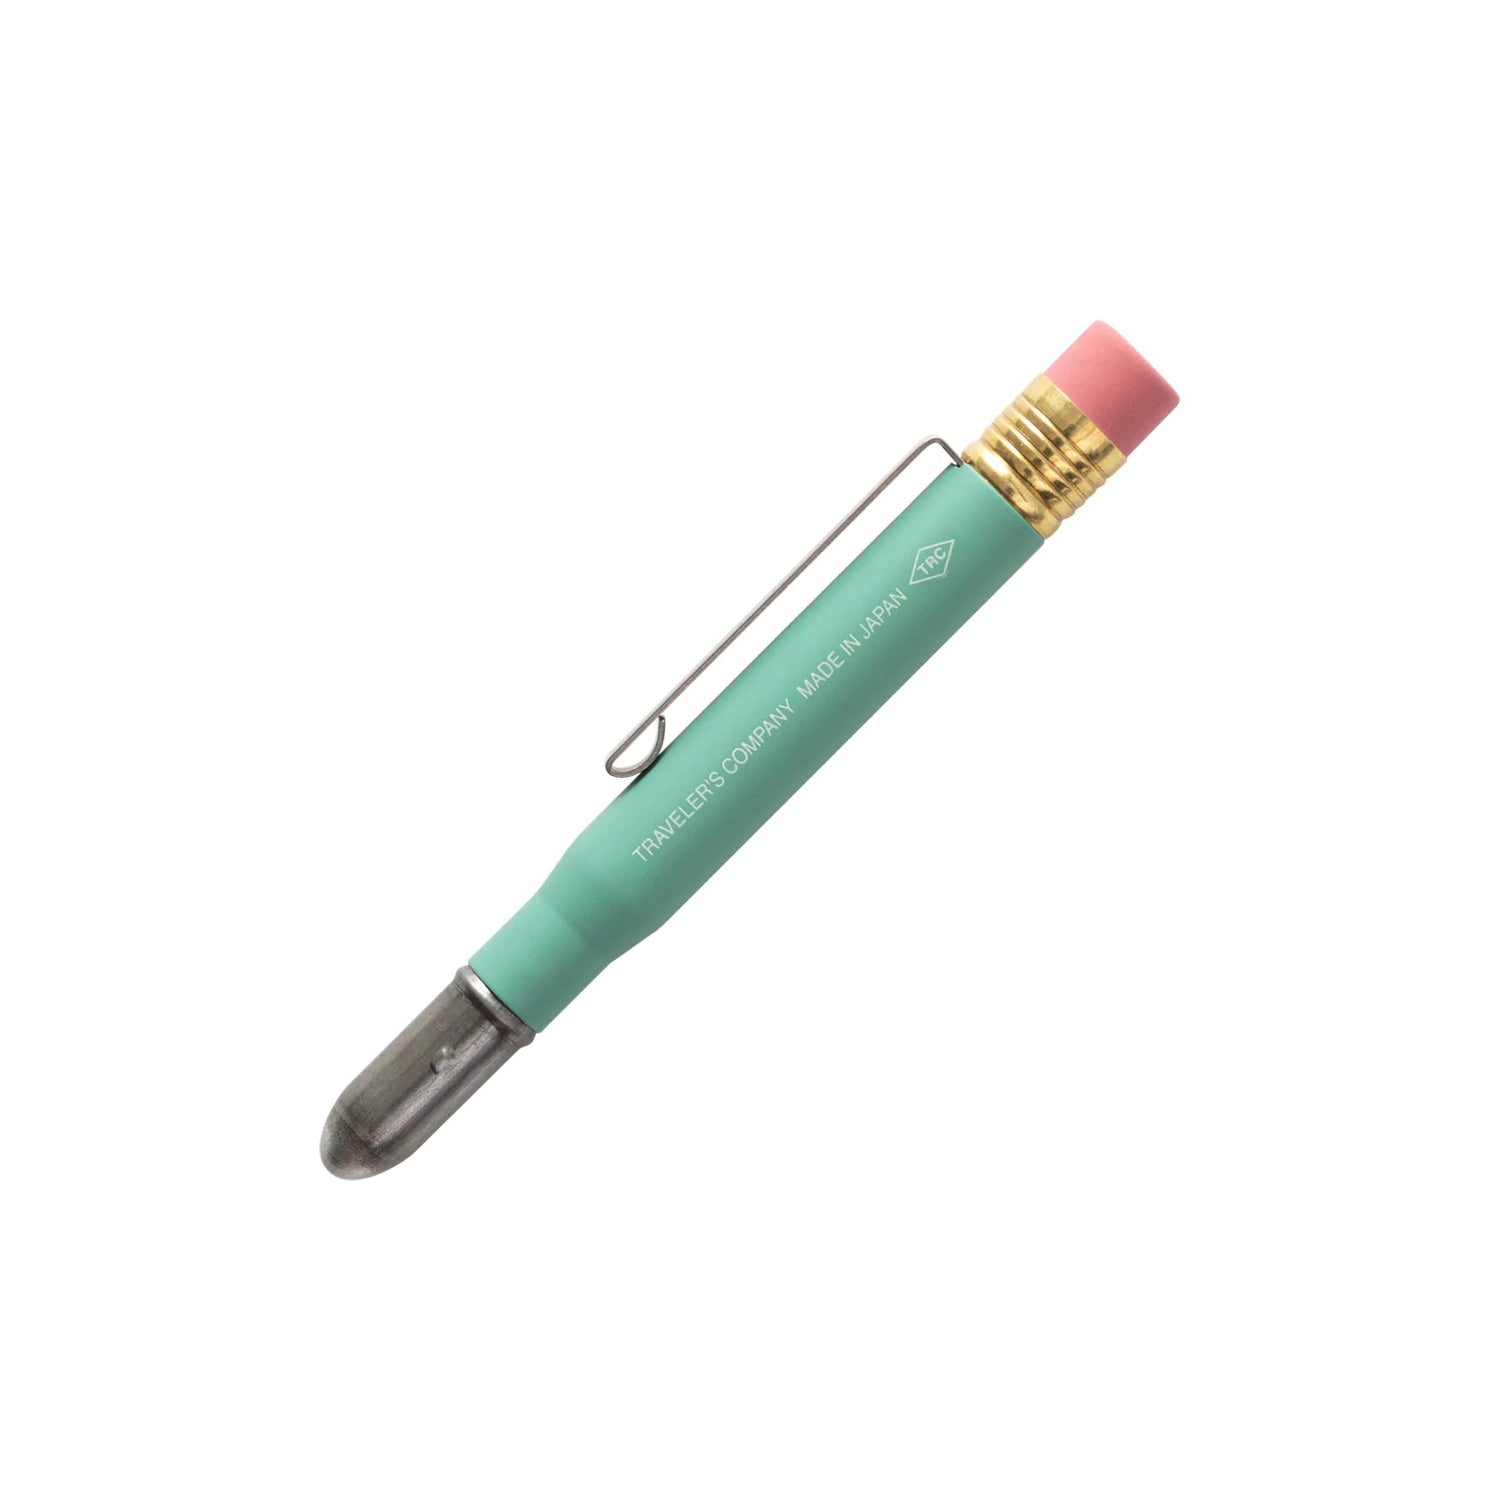 Traveler's Company Traveler's Company TRC Factory Green Brass Pencil Limited Edition 